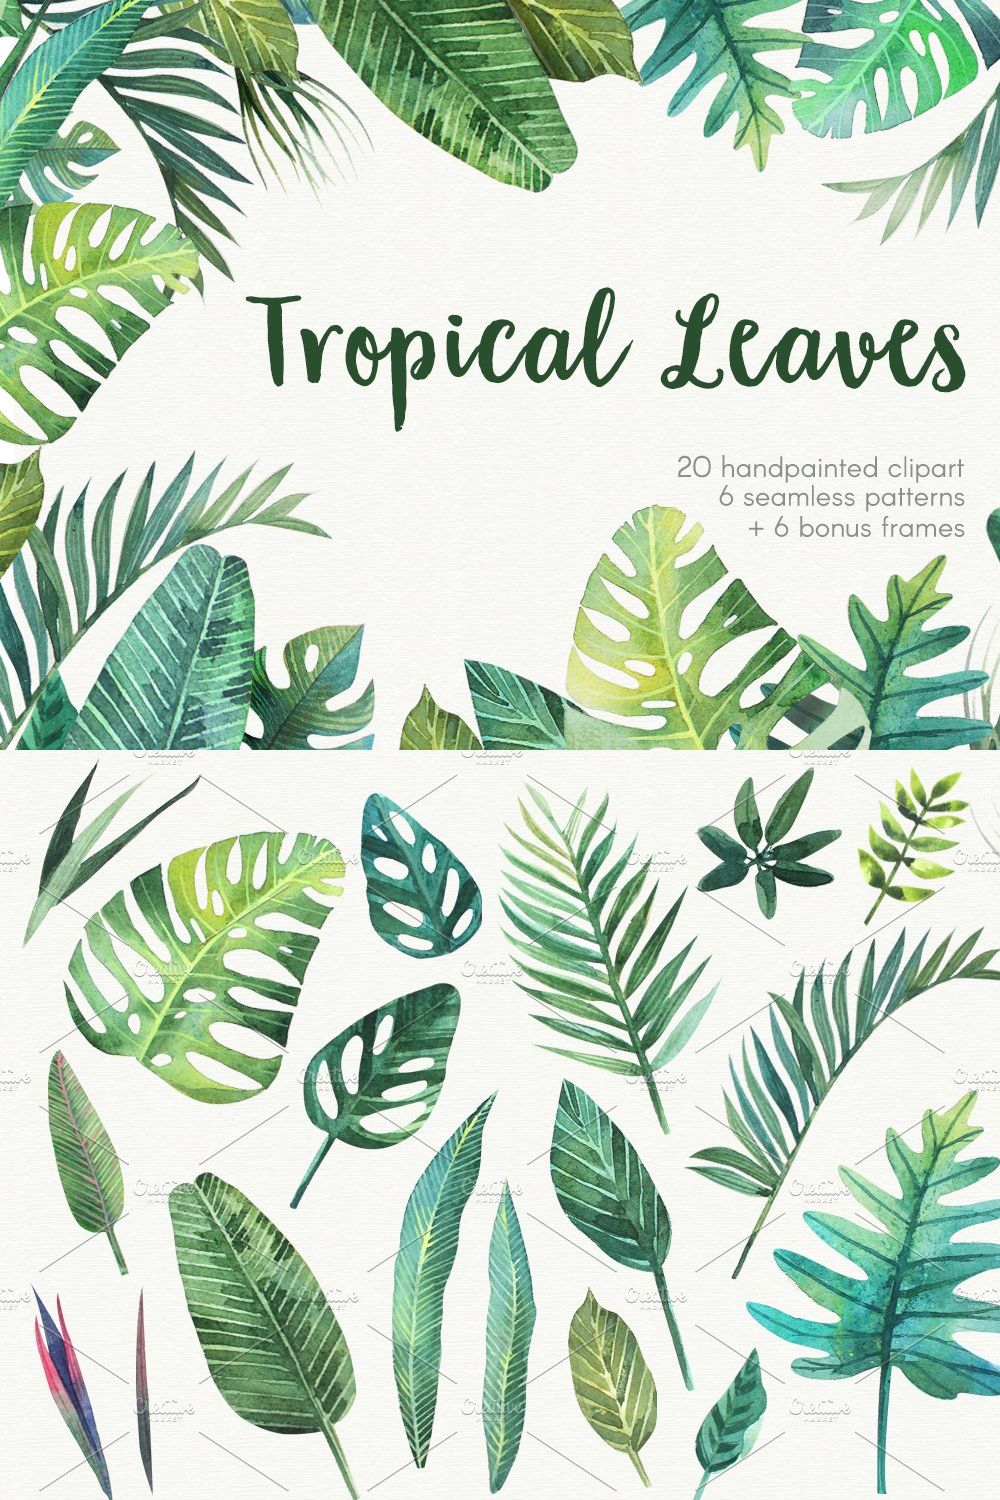 Tropical leaves pinterest preview image.